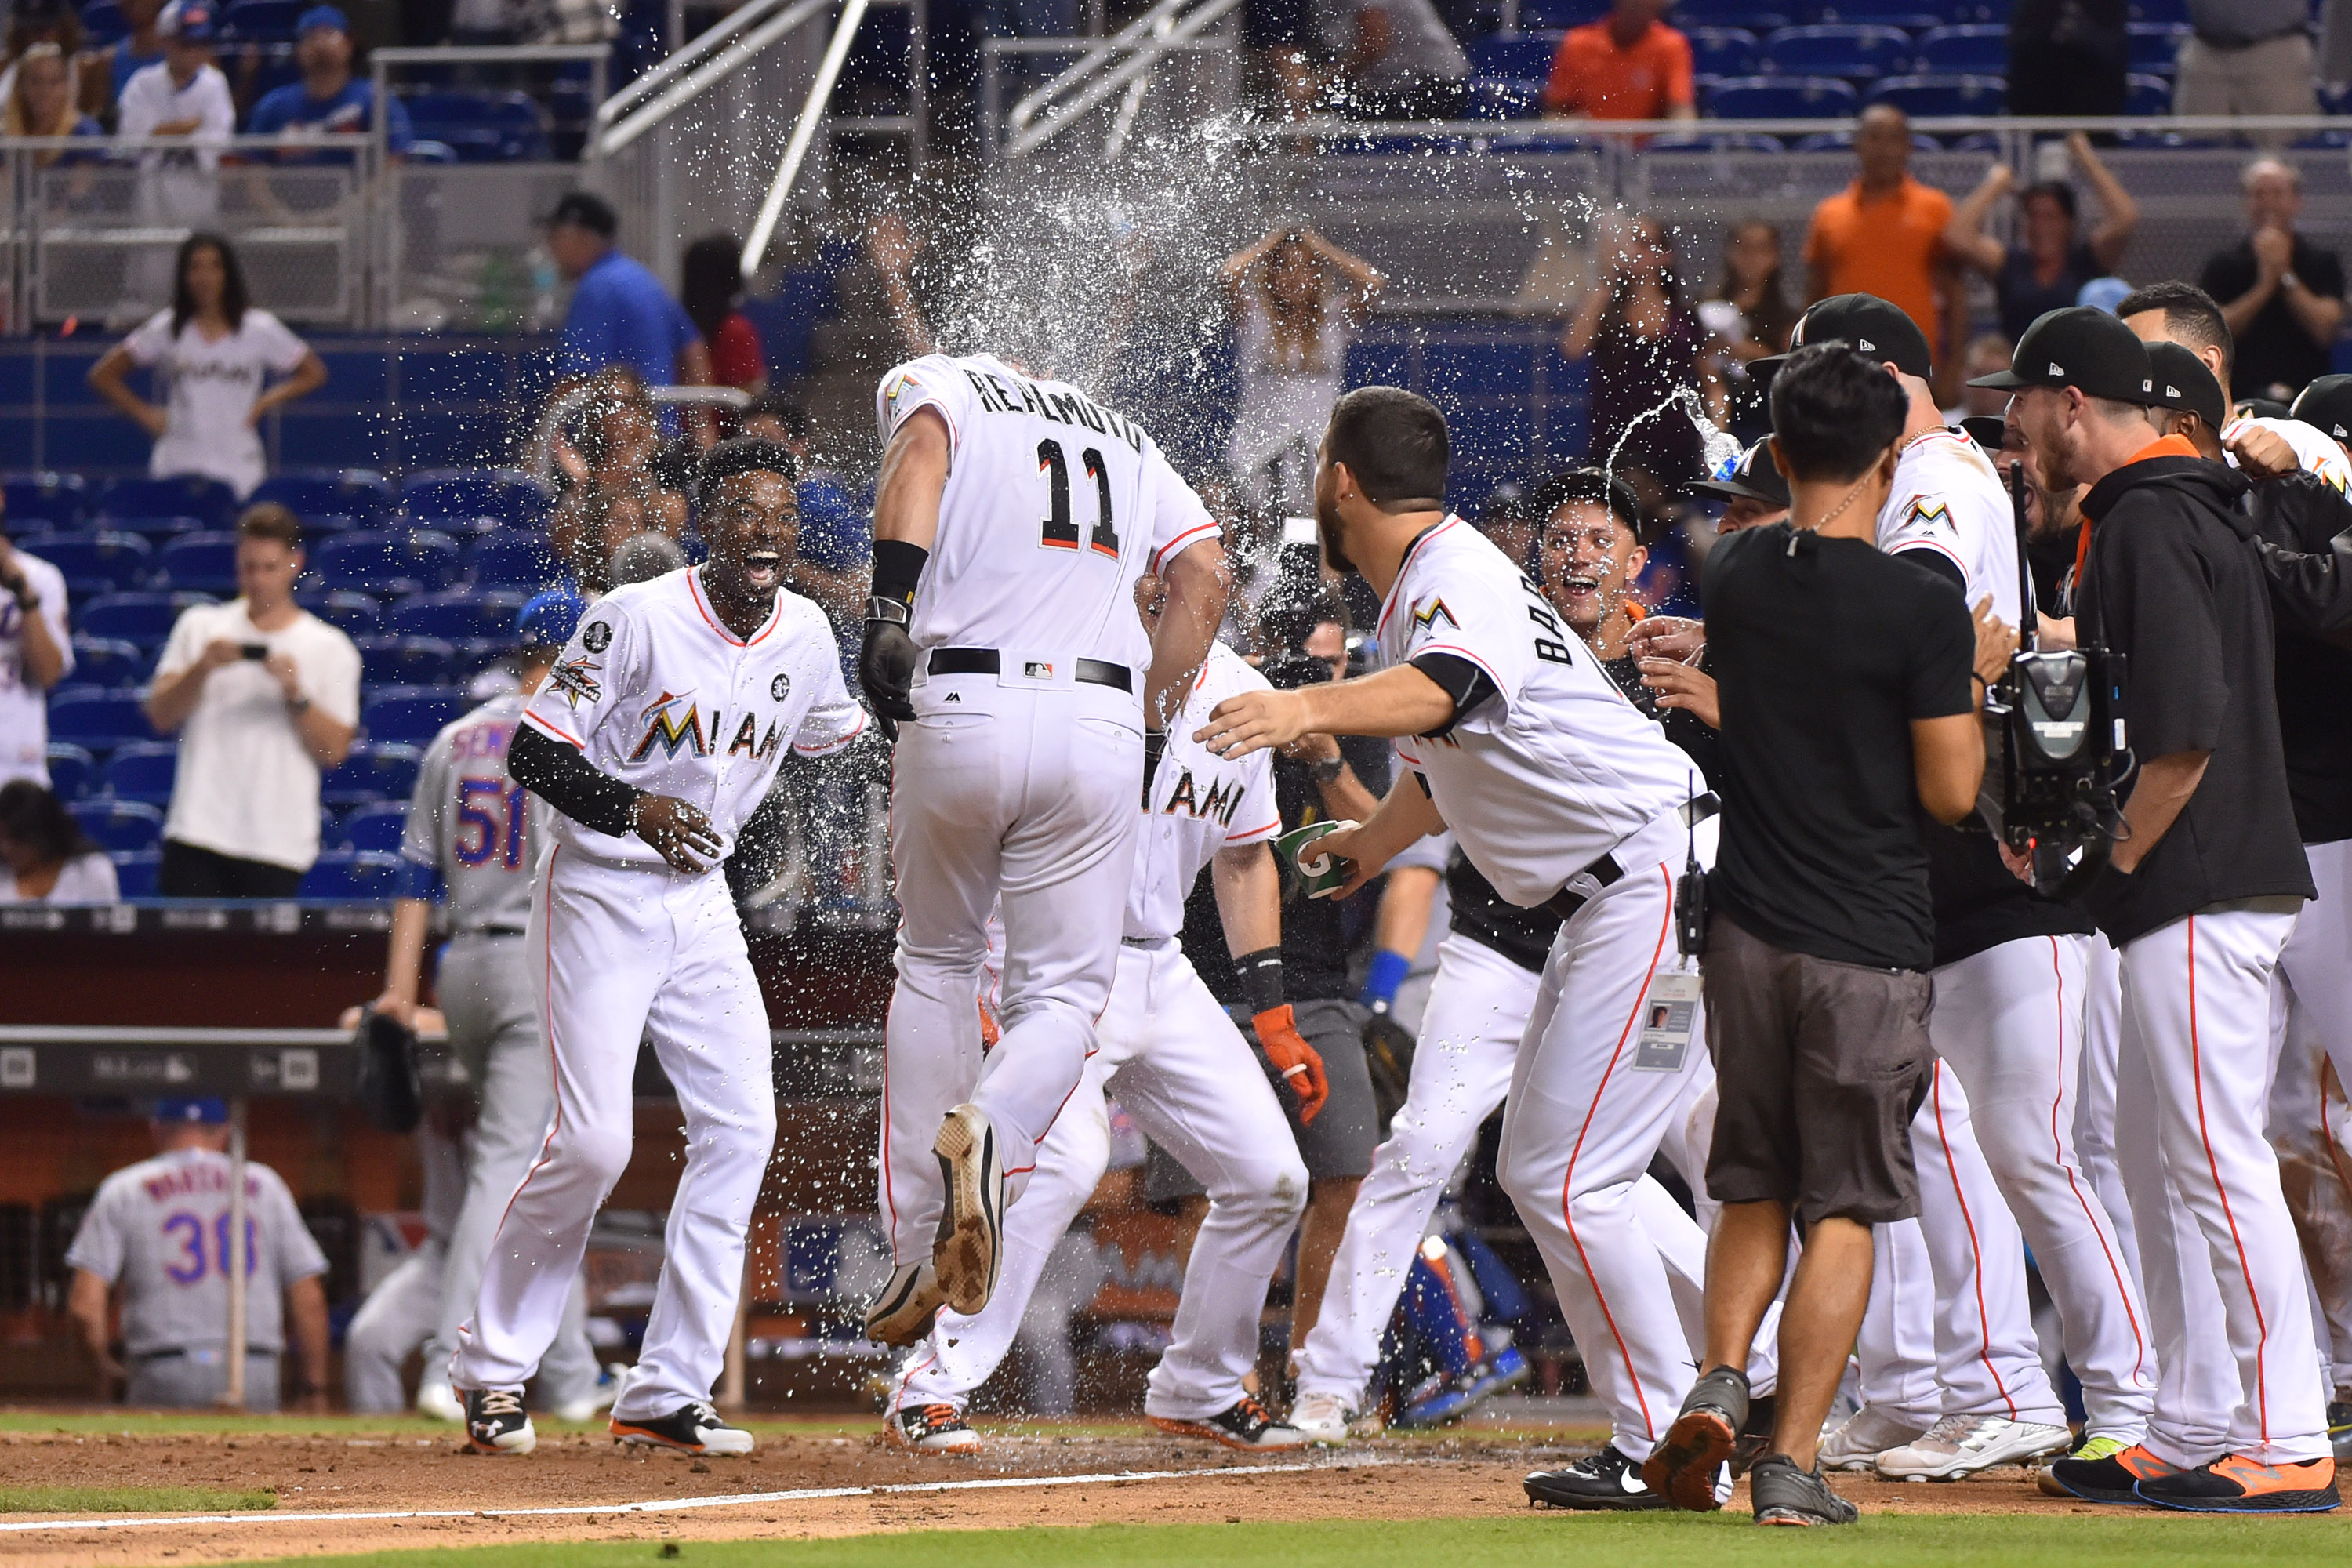 J.T. Realmuto #11 of the Miami Marlins is congratulated by teammates after hitting a walk off home run in the tenth inning against the New York Mets at Marlins Park on September 19, 2017 in Miami, Florida.